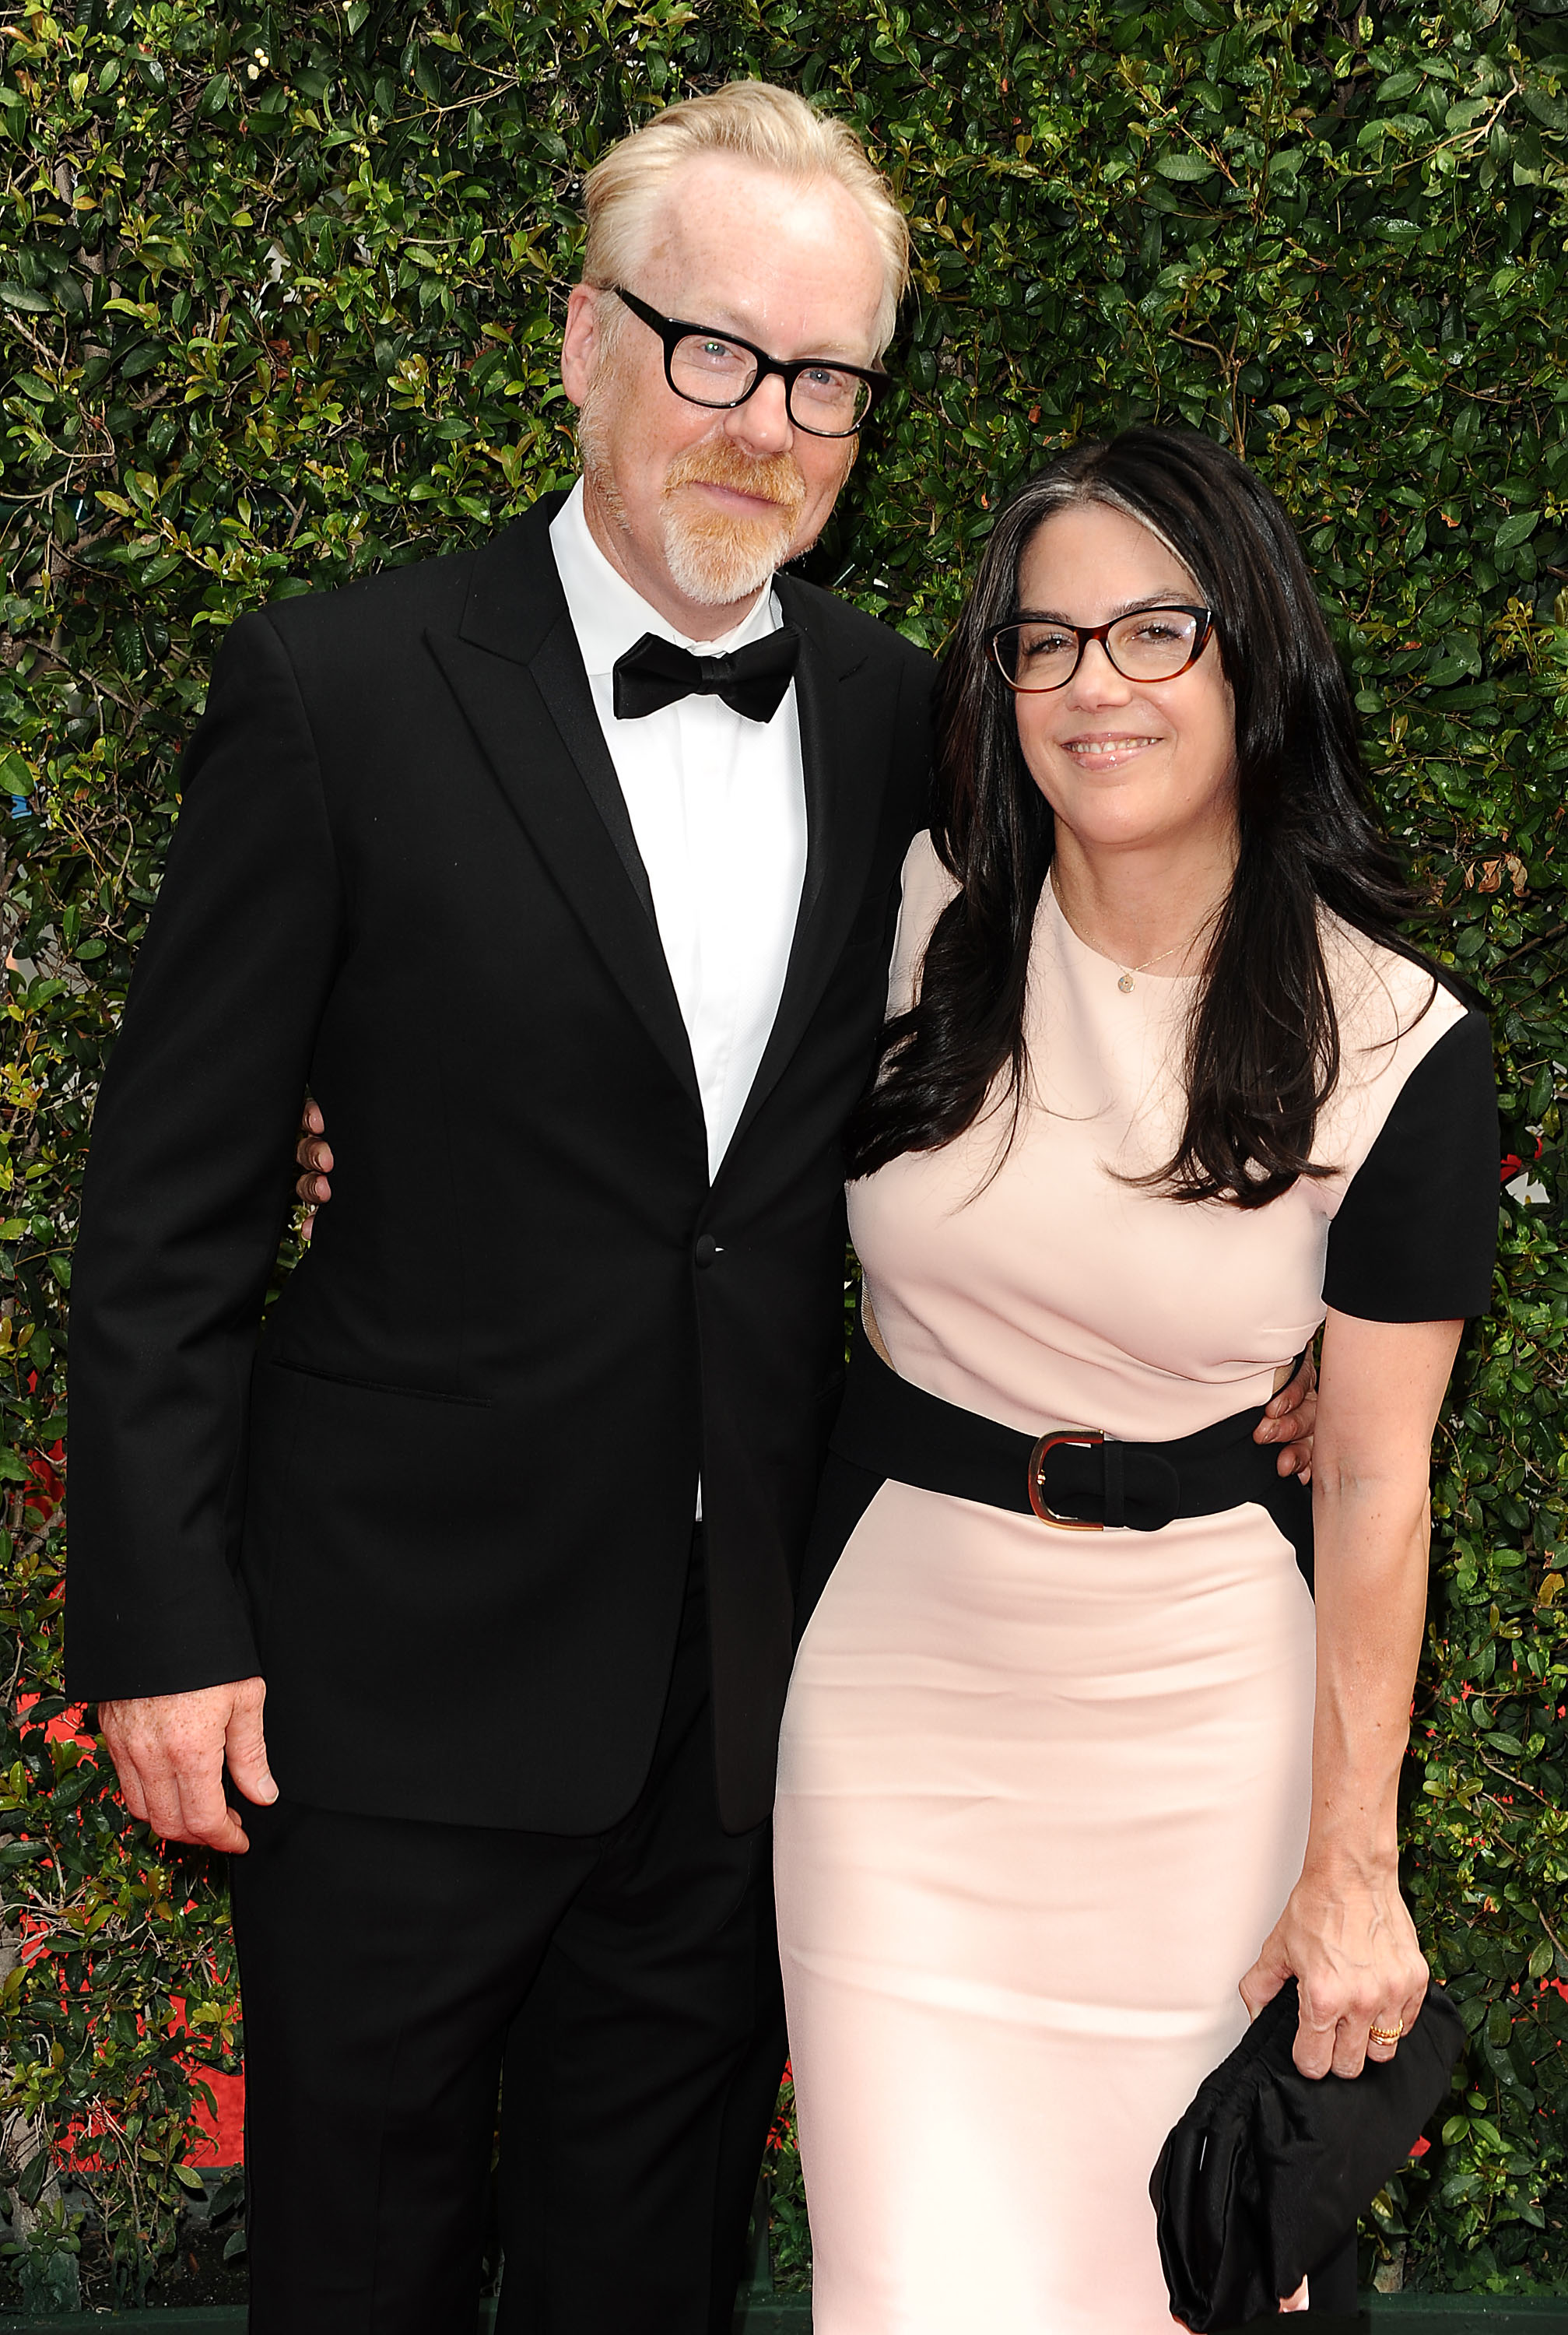 Adam Savage and Julia Ward at the 2015 Creative Arts Emmy Awards on September 12, 2015, in Los Angeles, California. | Source: Getty Images